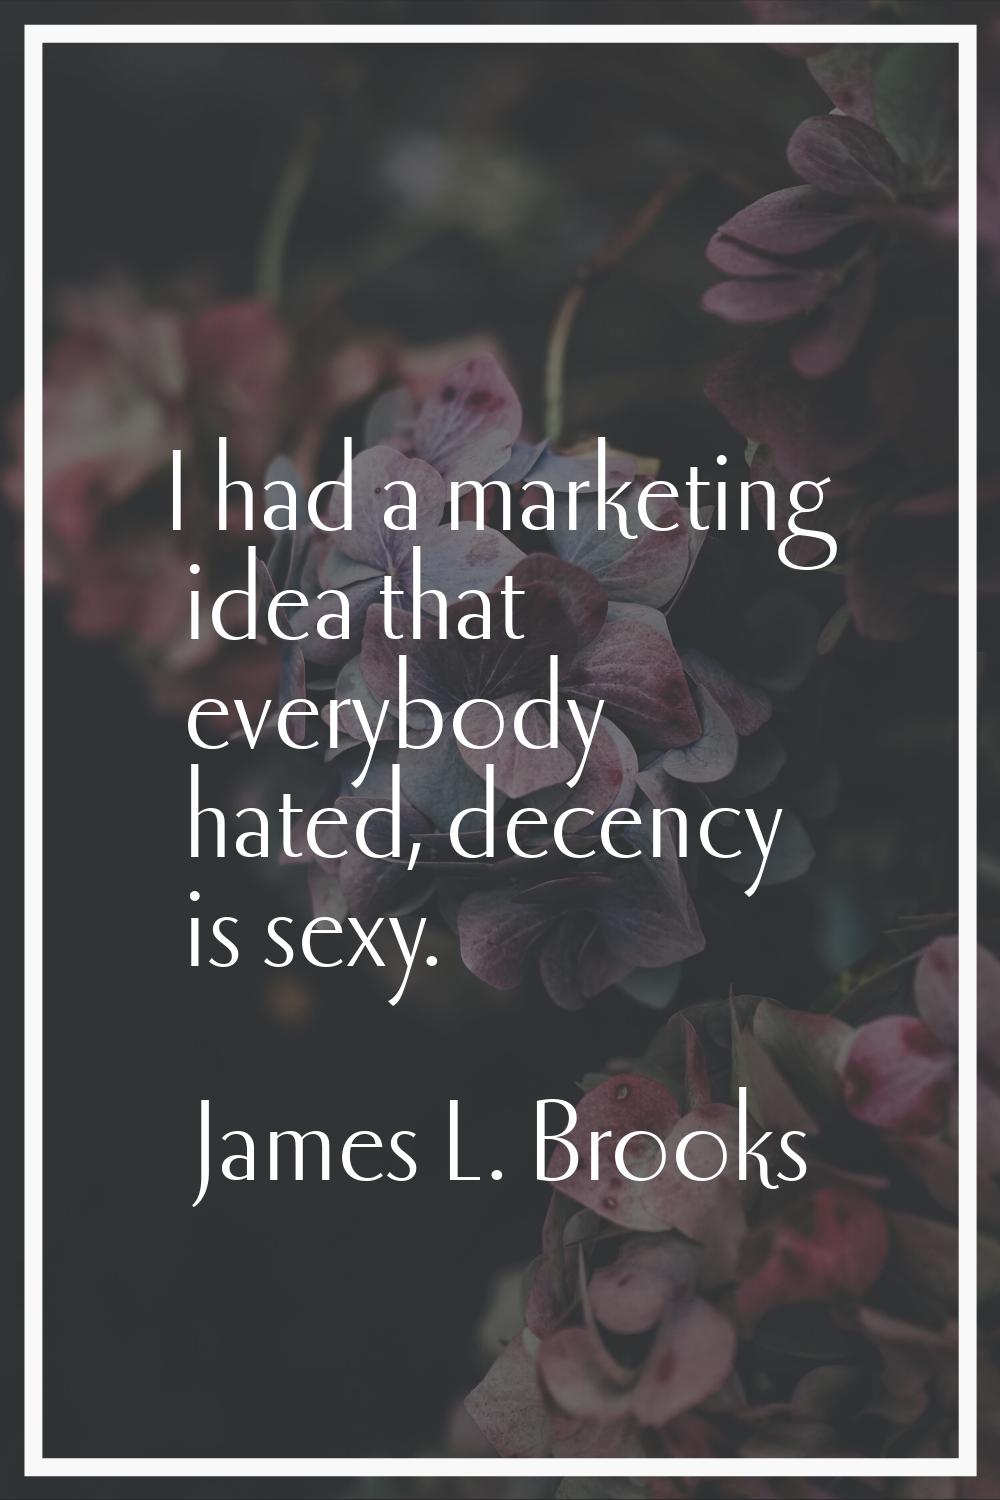 I had a marketing idea that everybody hated, decency is sexy.